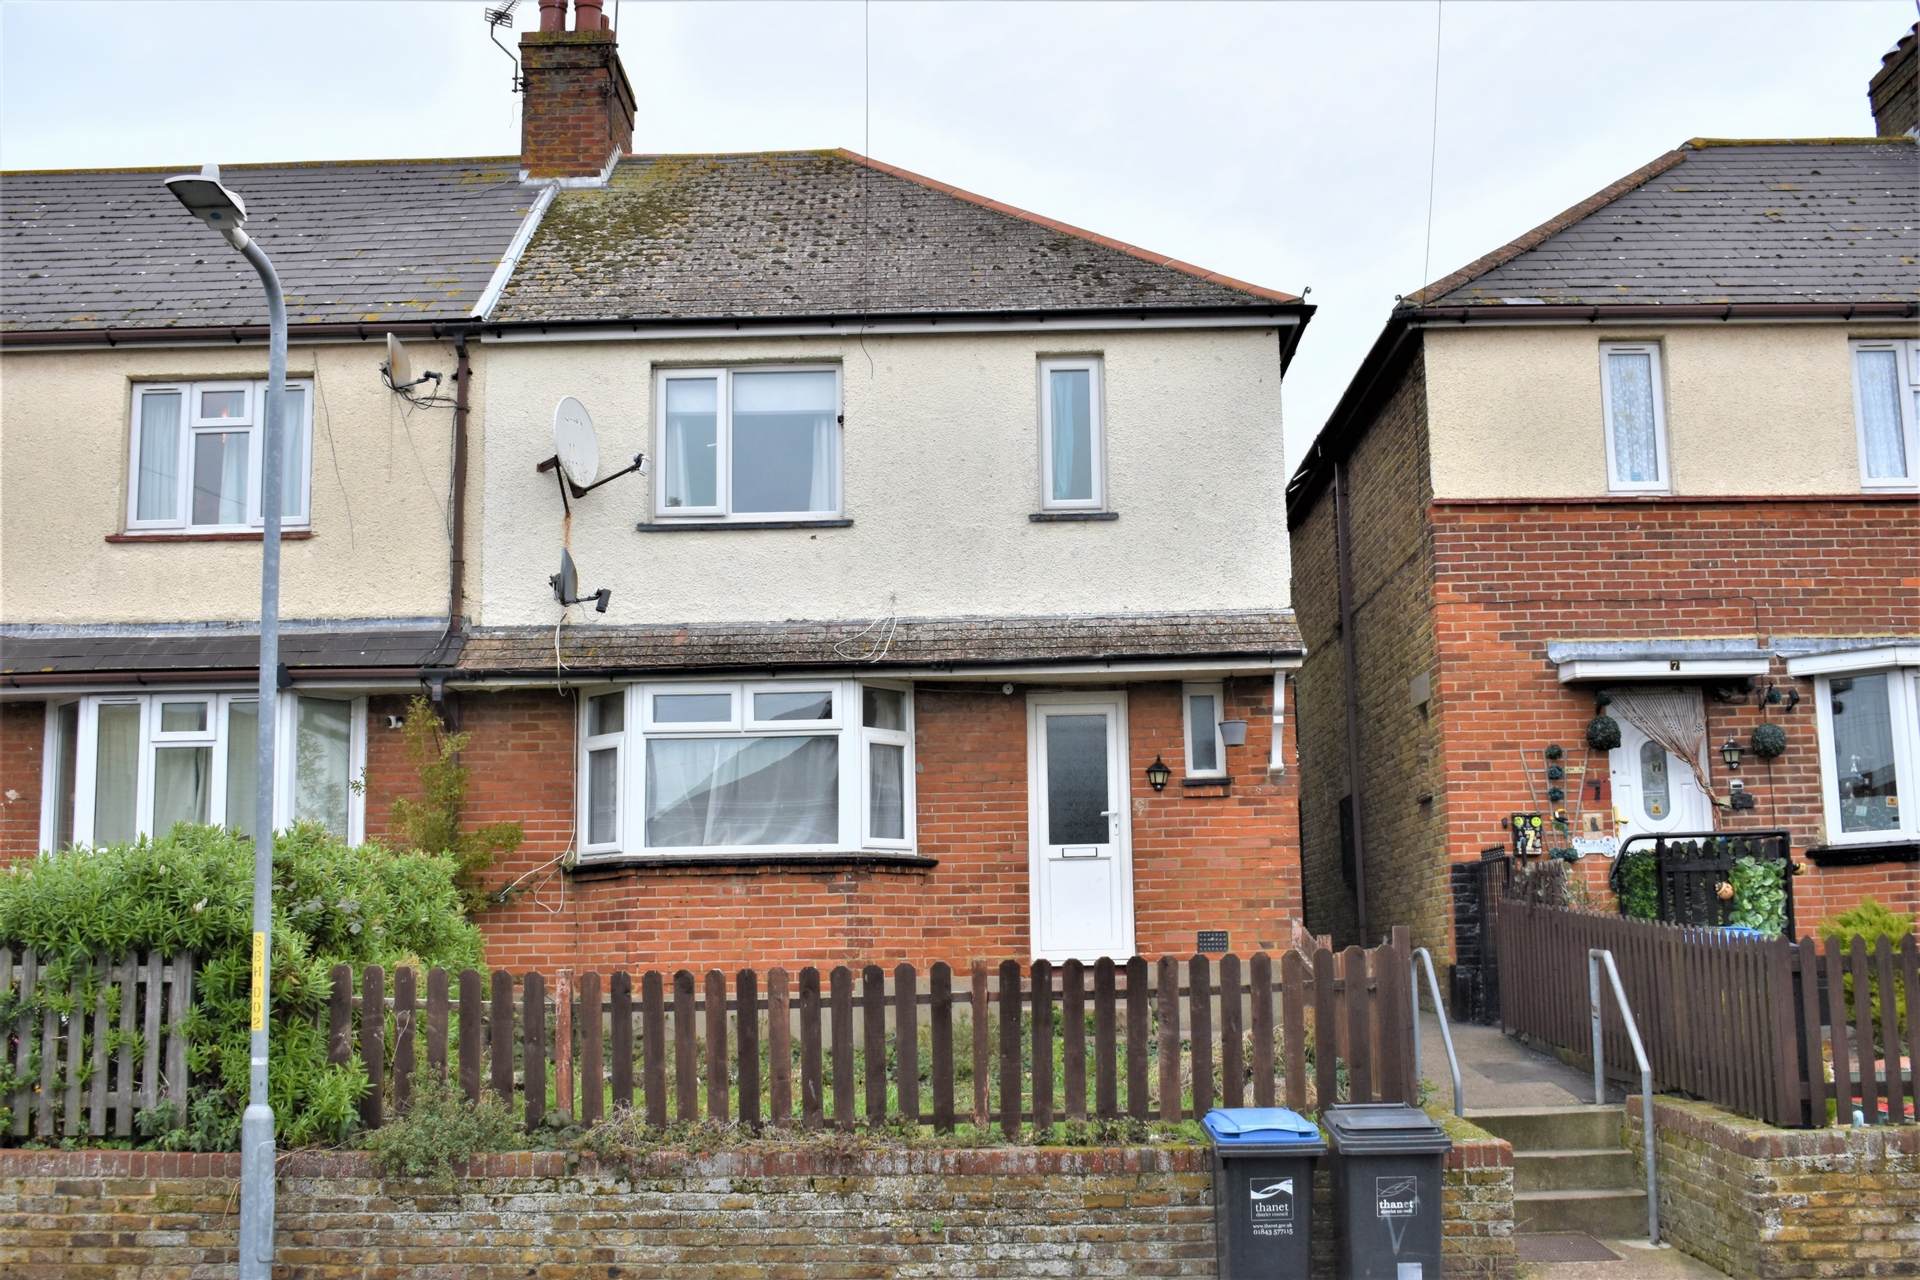 4 bed end of terrace house for sale in Selborne Road, Margate, CT9 